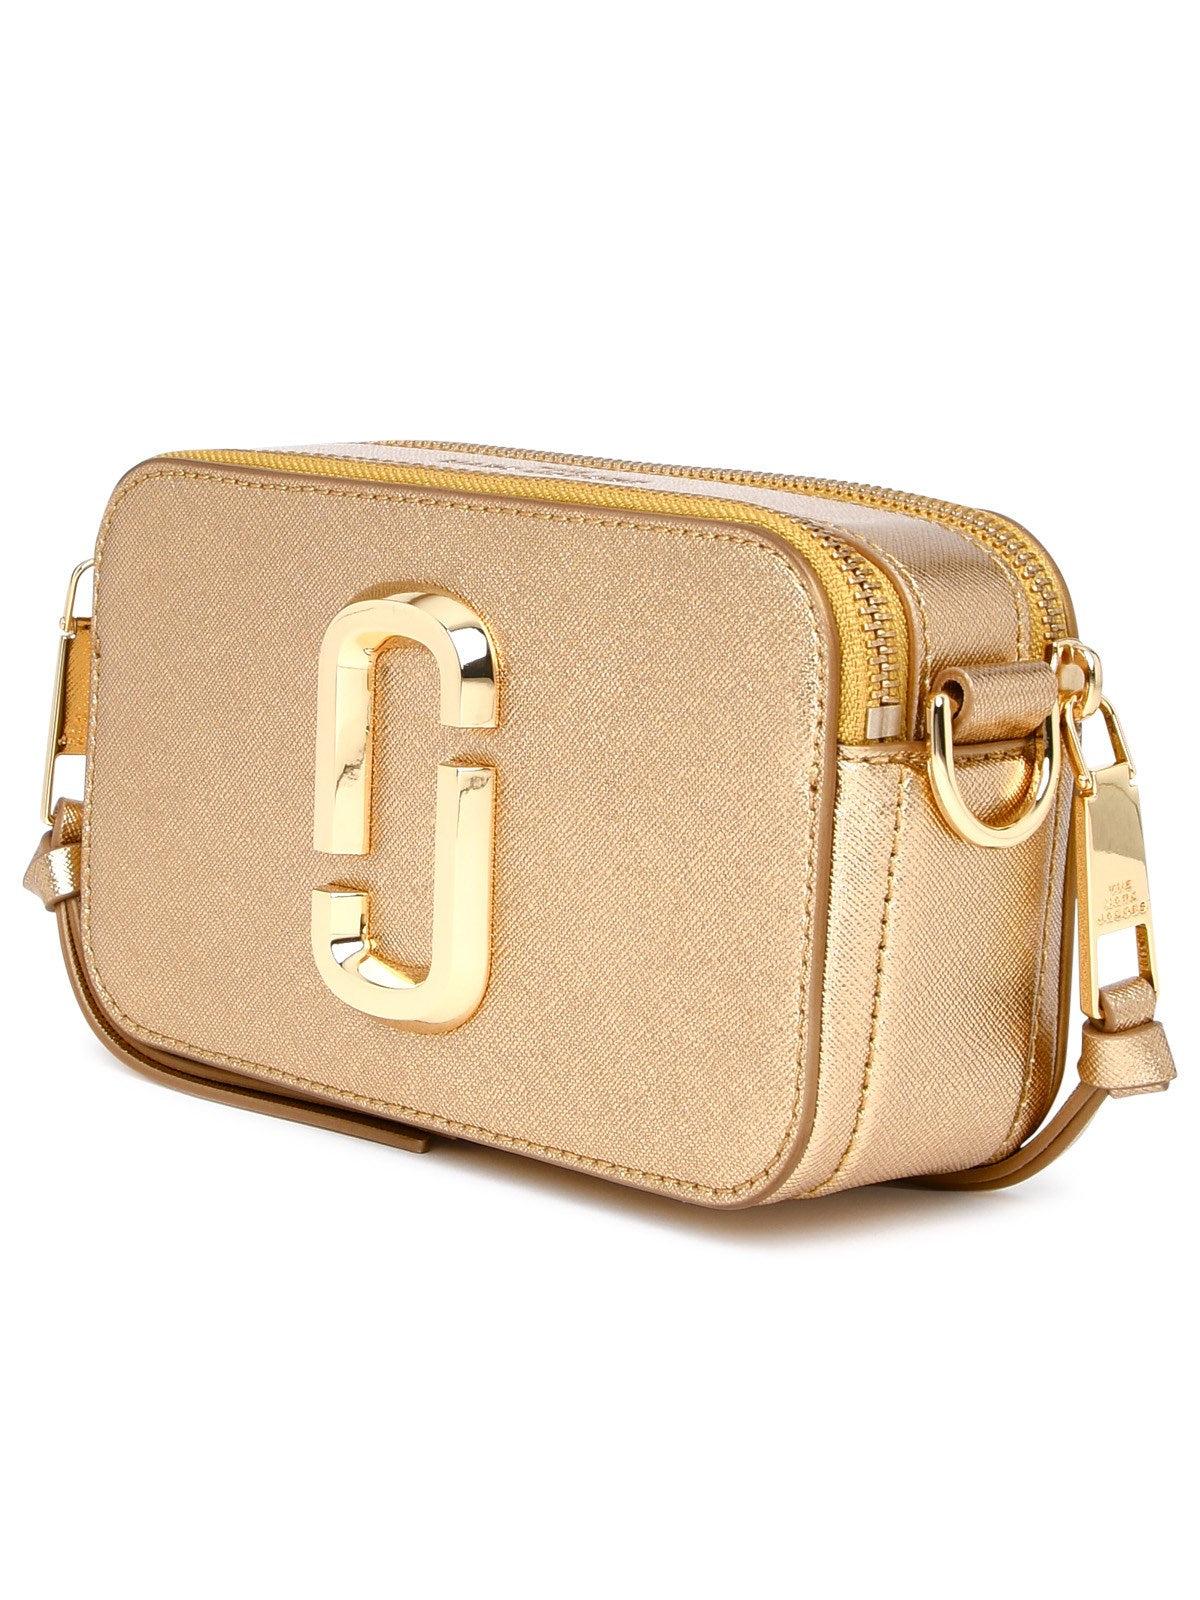 Marc Jacobs Gold Leather The Snapshot Bag in Metallic | Lyst